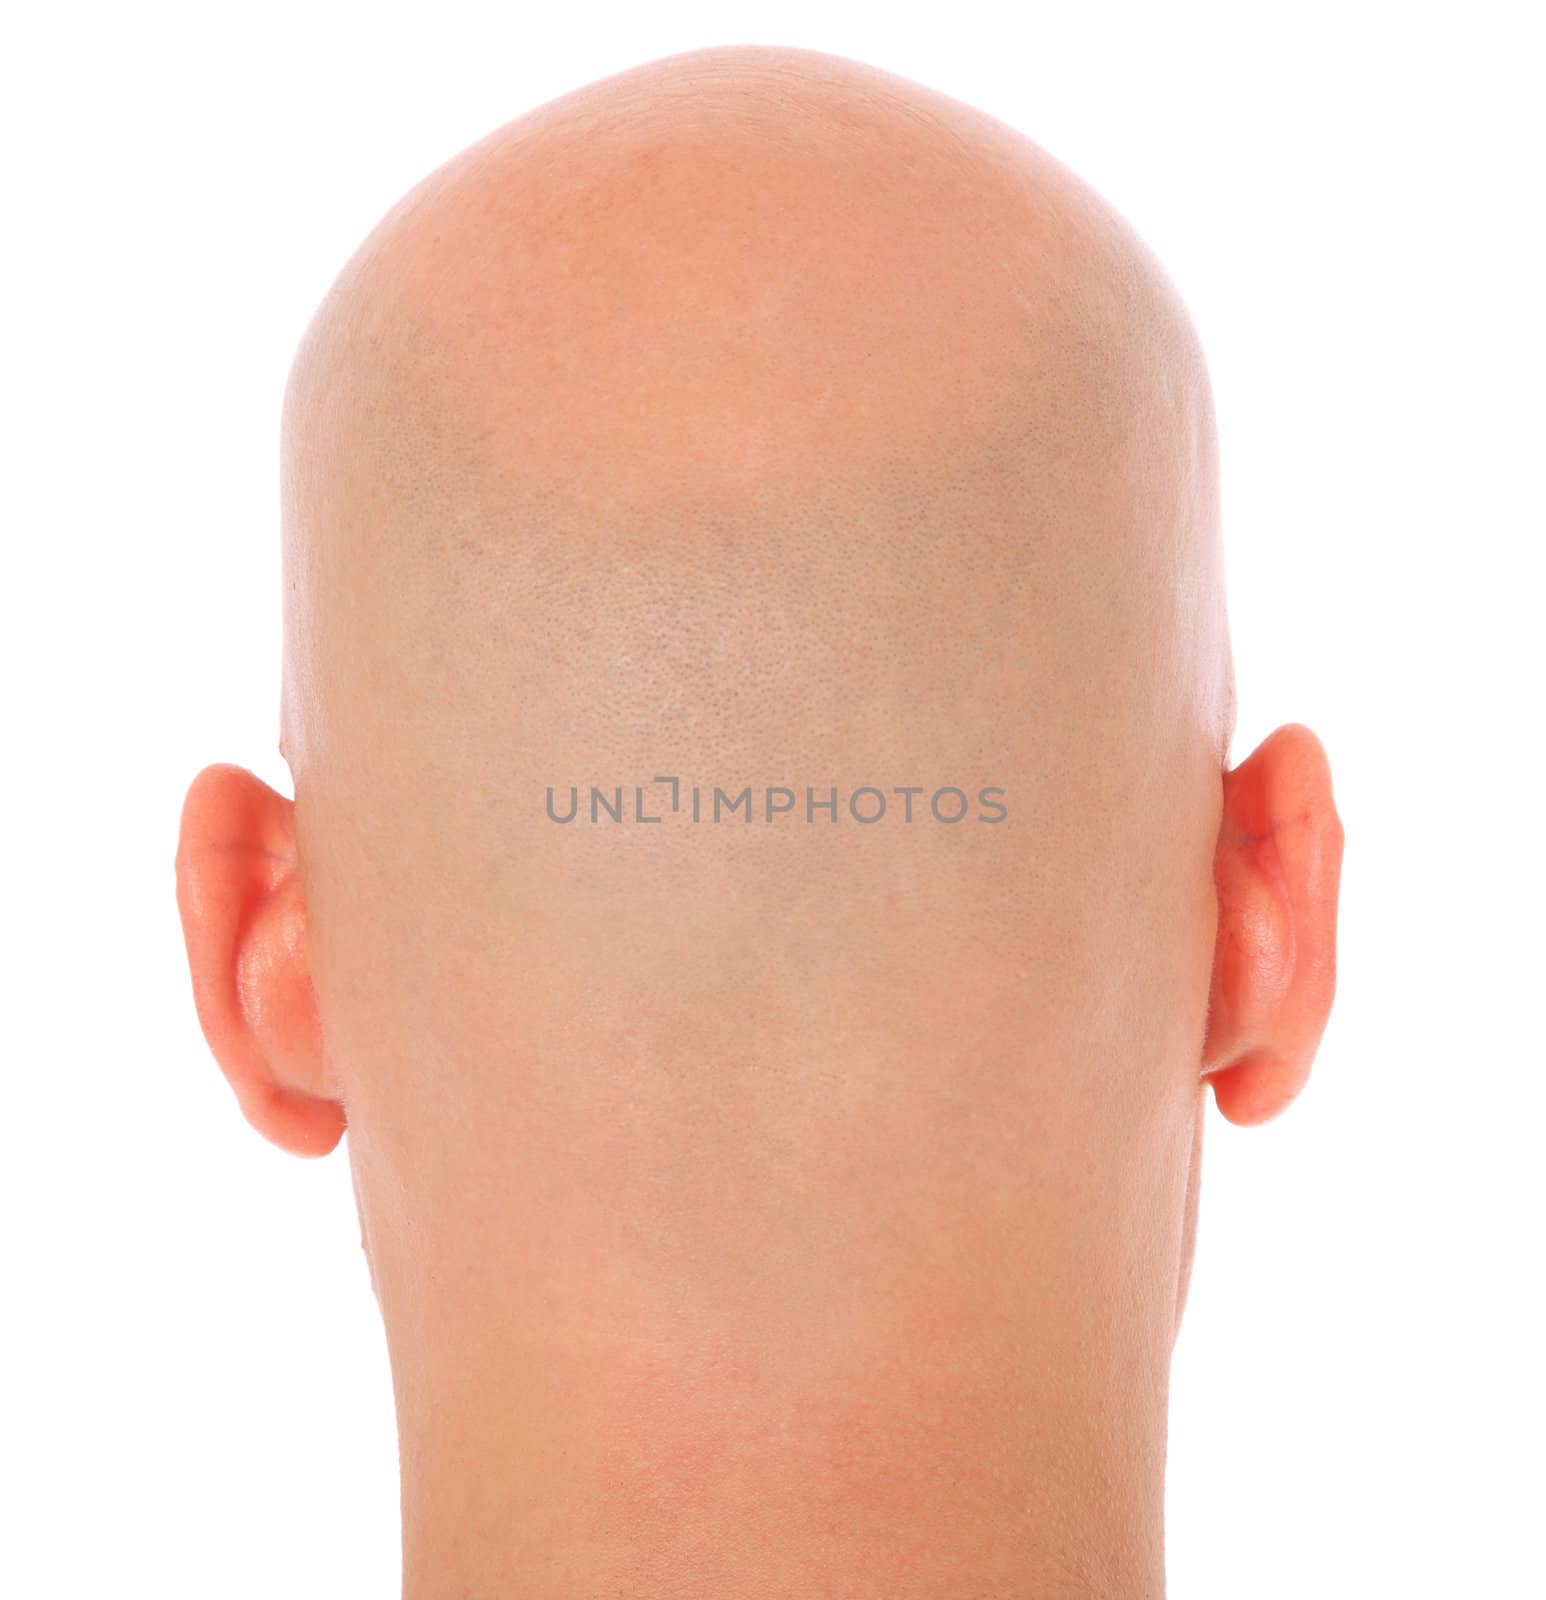 Back of the head of a bald man. All on white background.